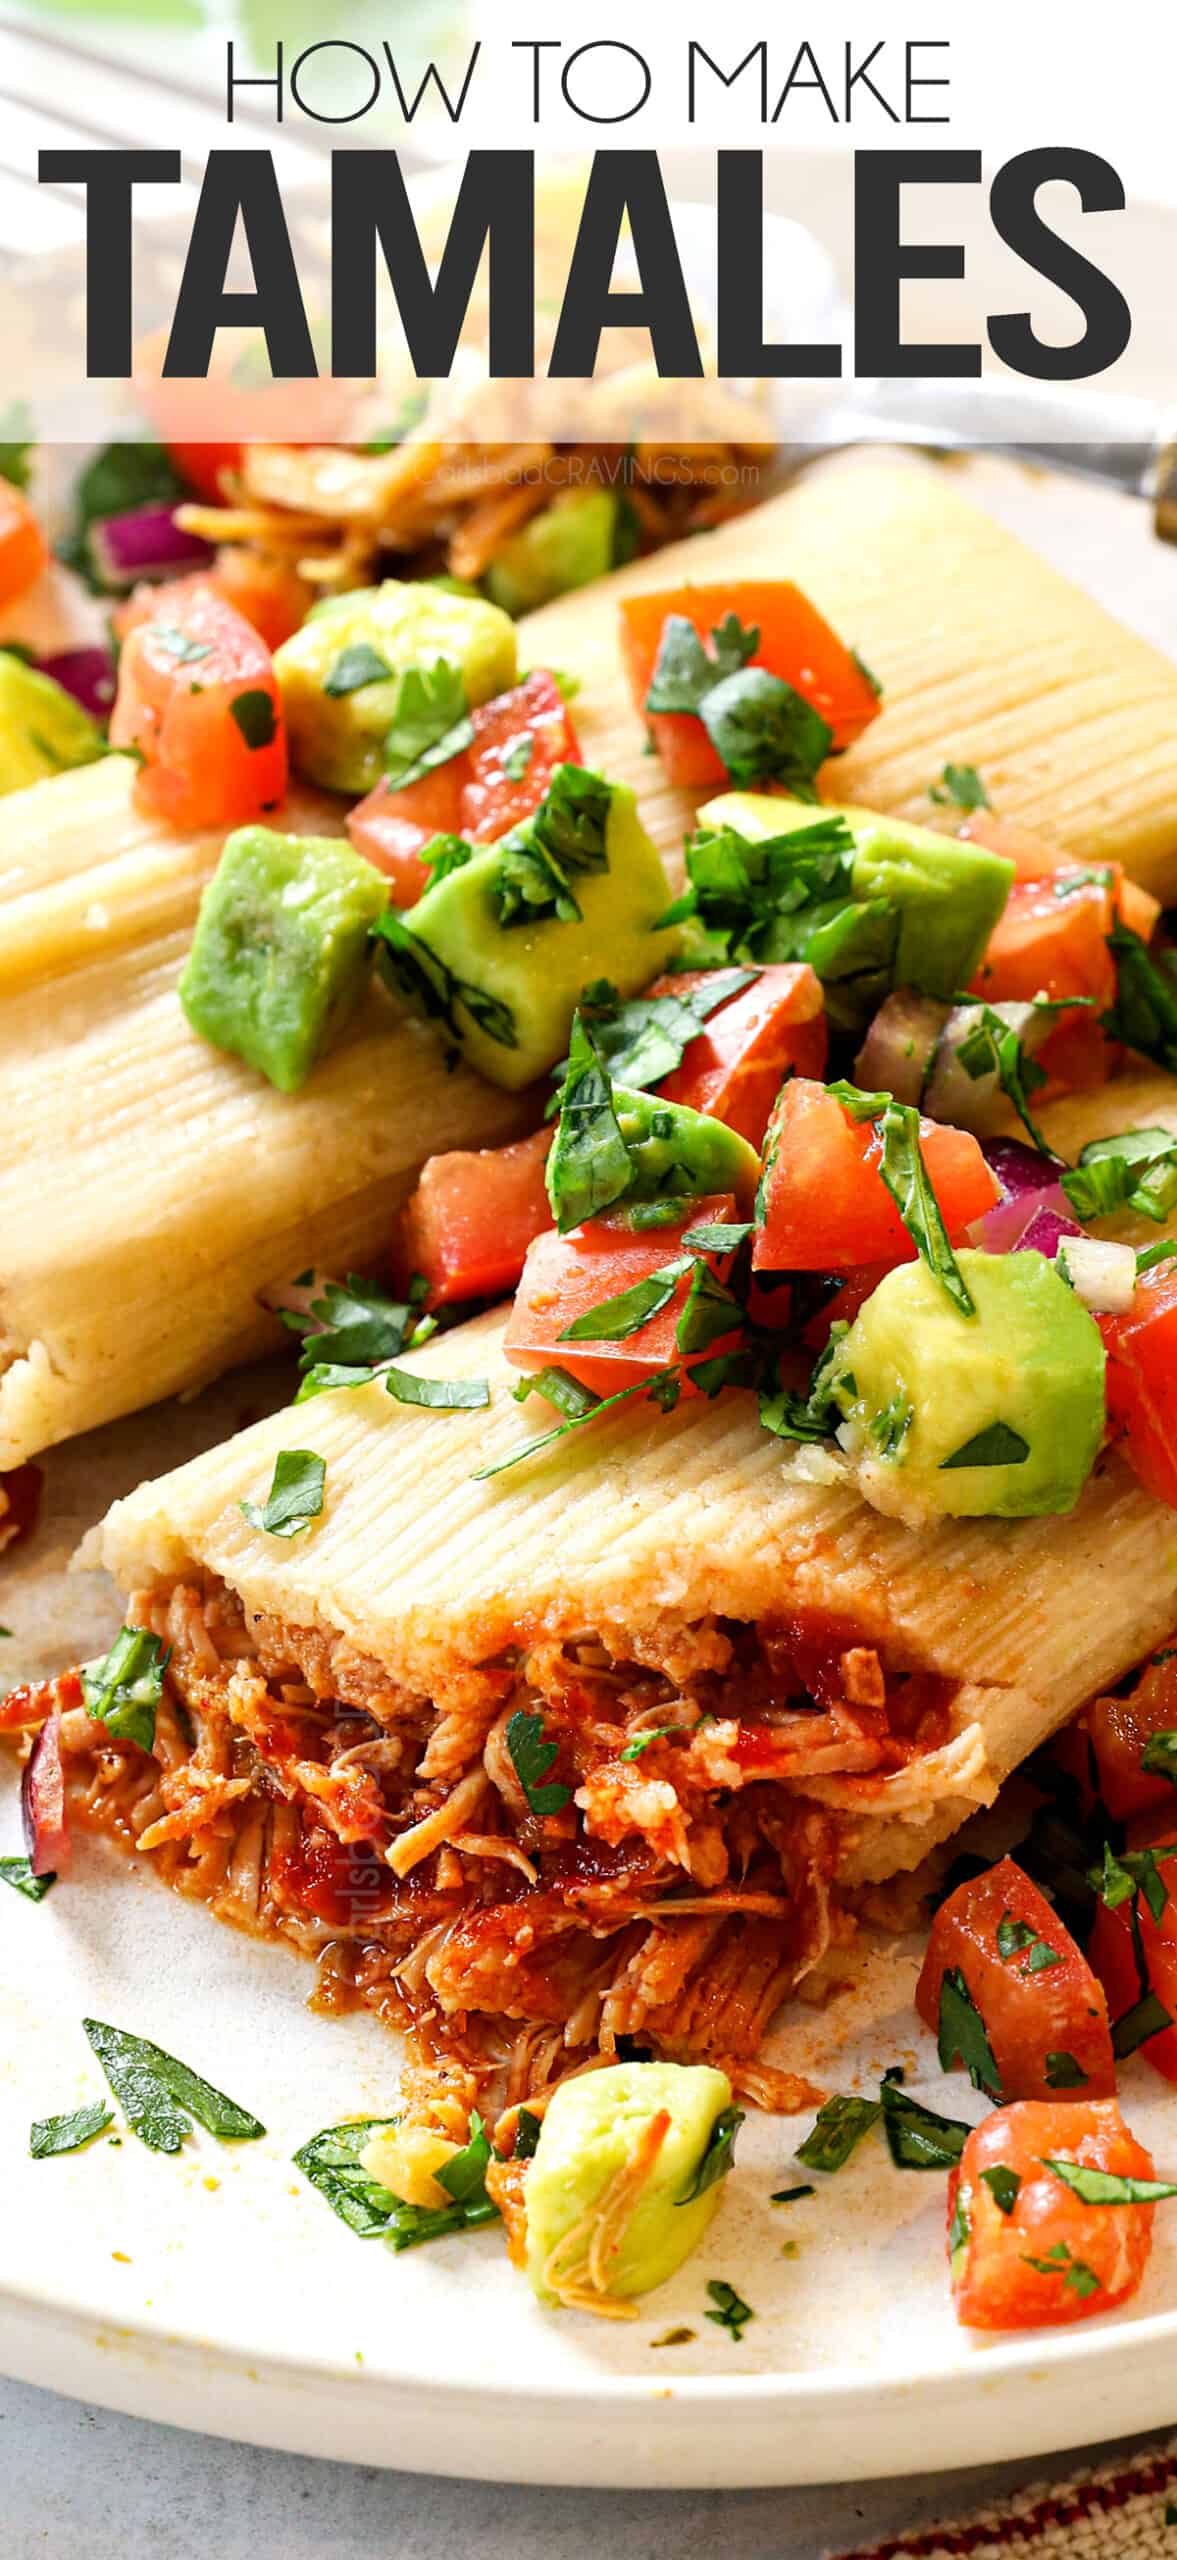 showing how to serve Mexican tamales by topping with pico de gallo and sour cream